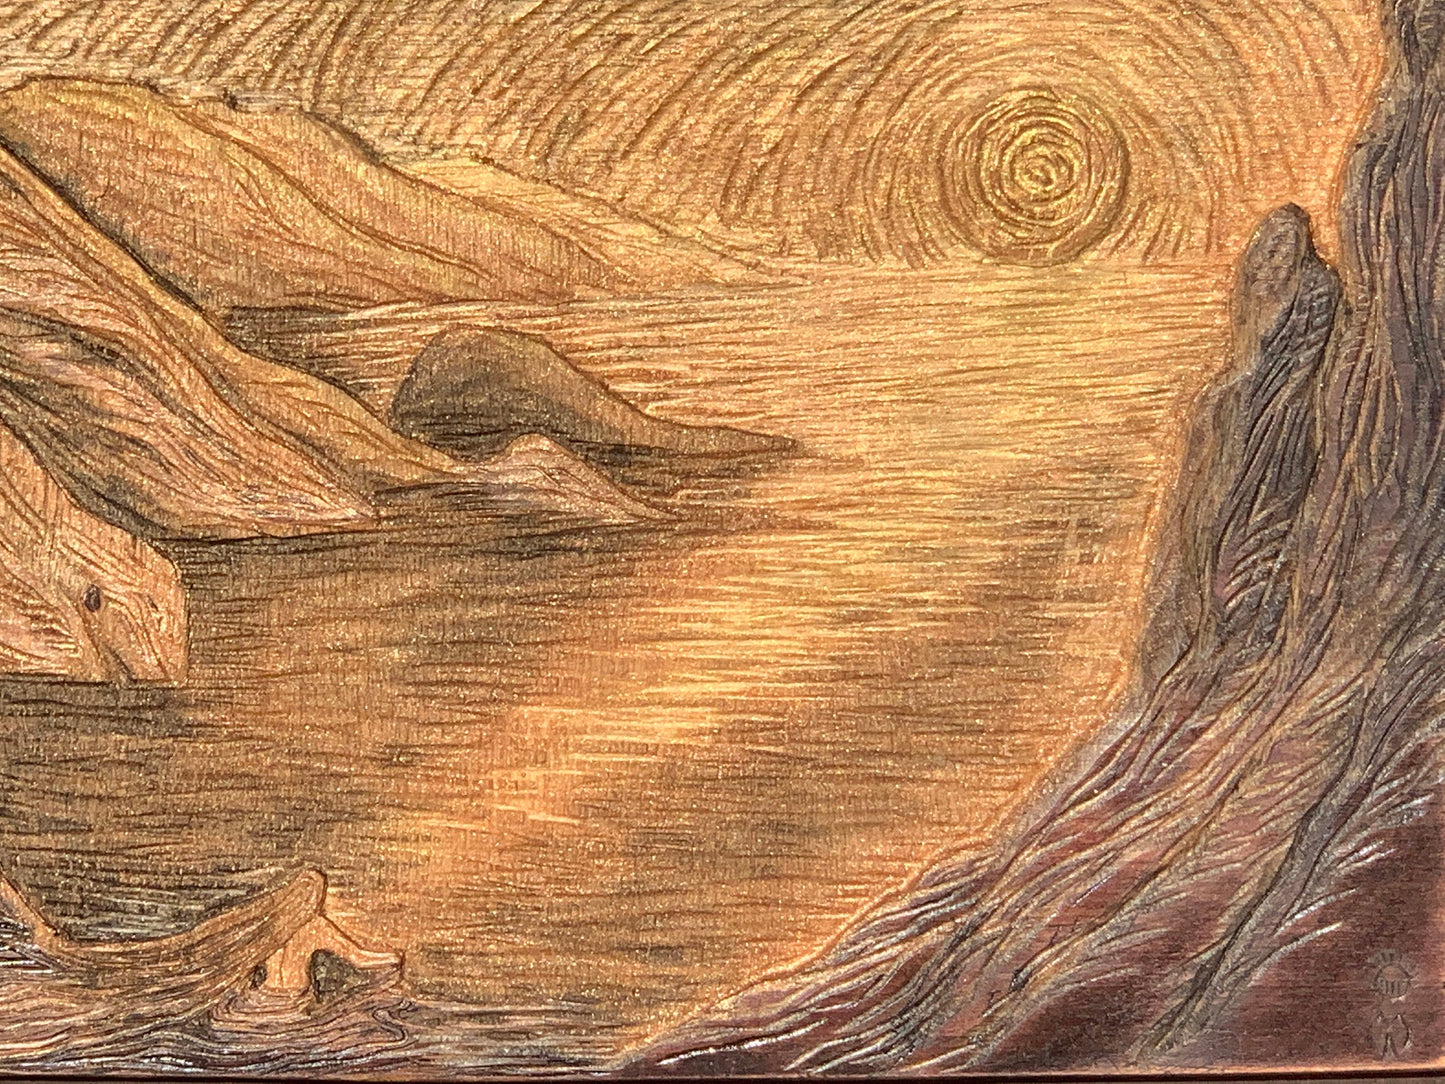 Hija del Sol Original Surreal Woman with Sunset Lake Hand-carved Cherry Woodblock Gold Copper Umber